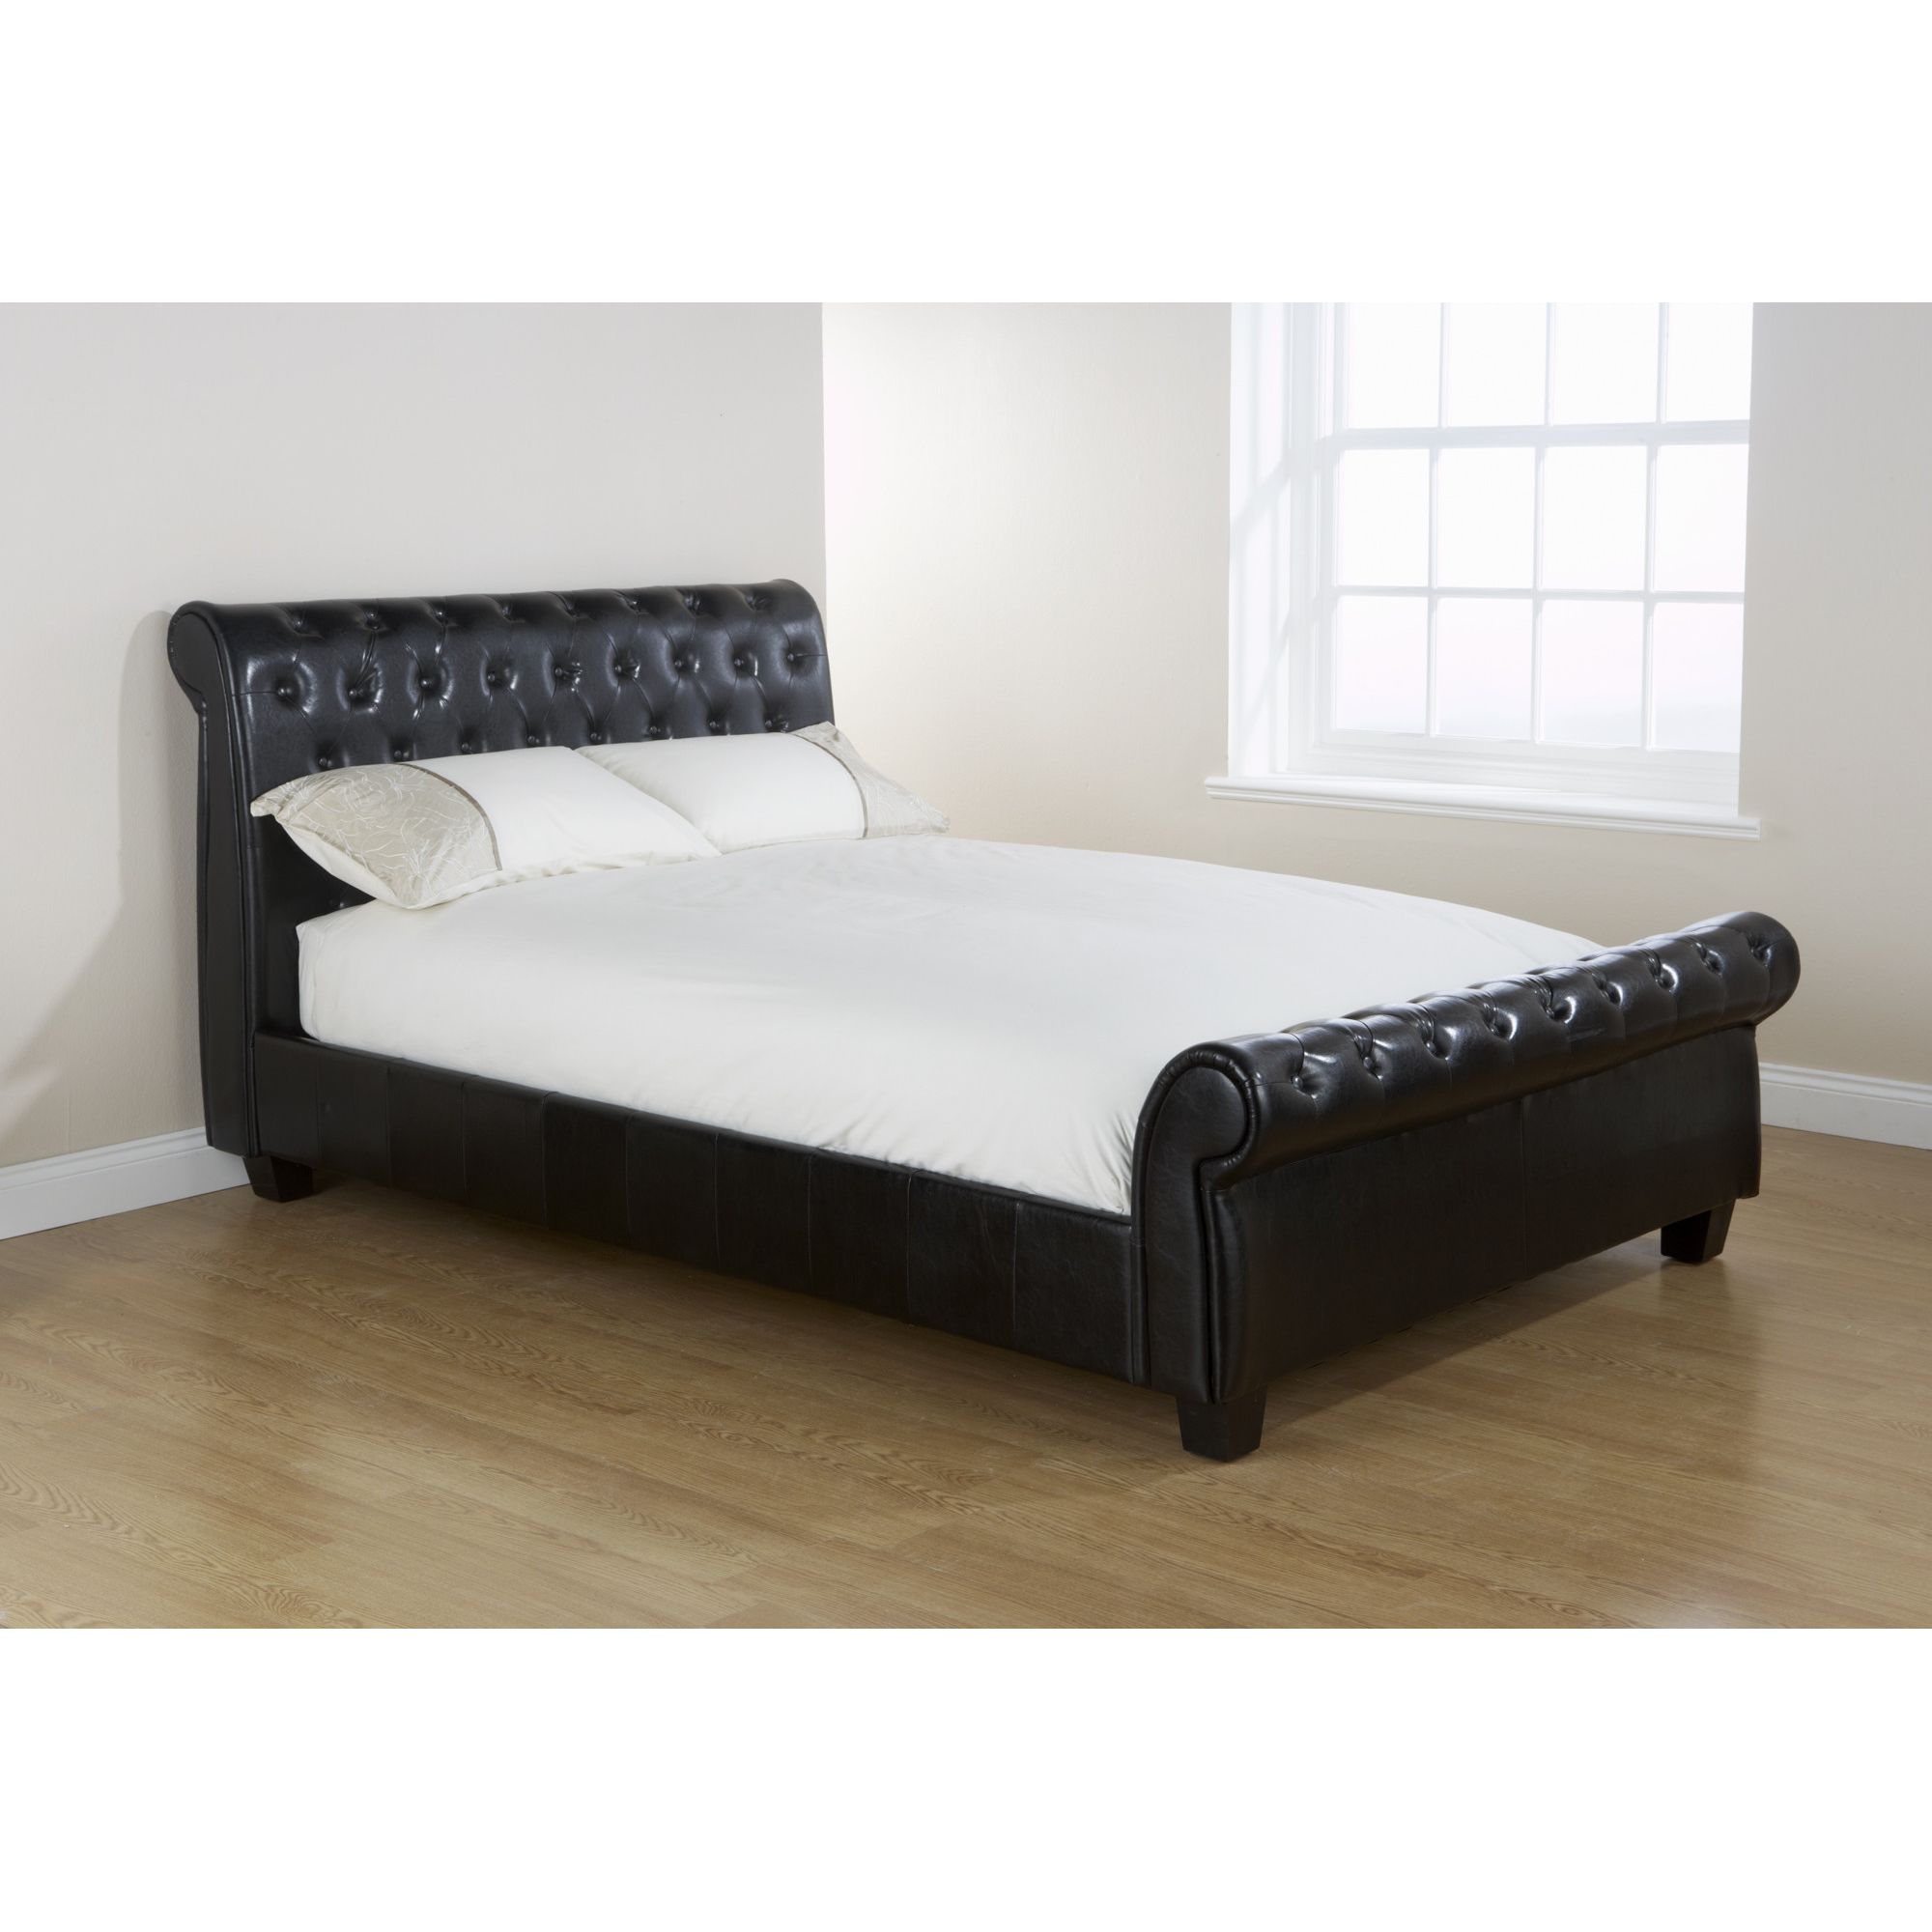 Elements Knightsbridge Button Bed - Double at Tesco Direct